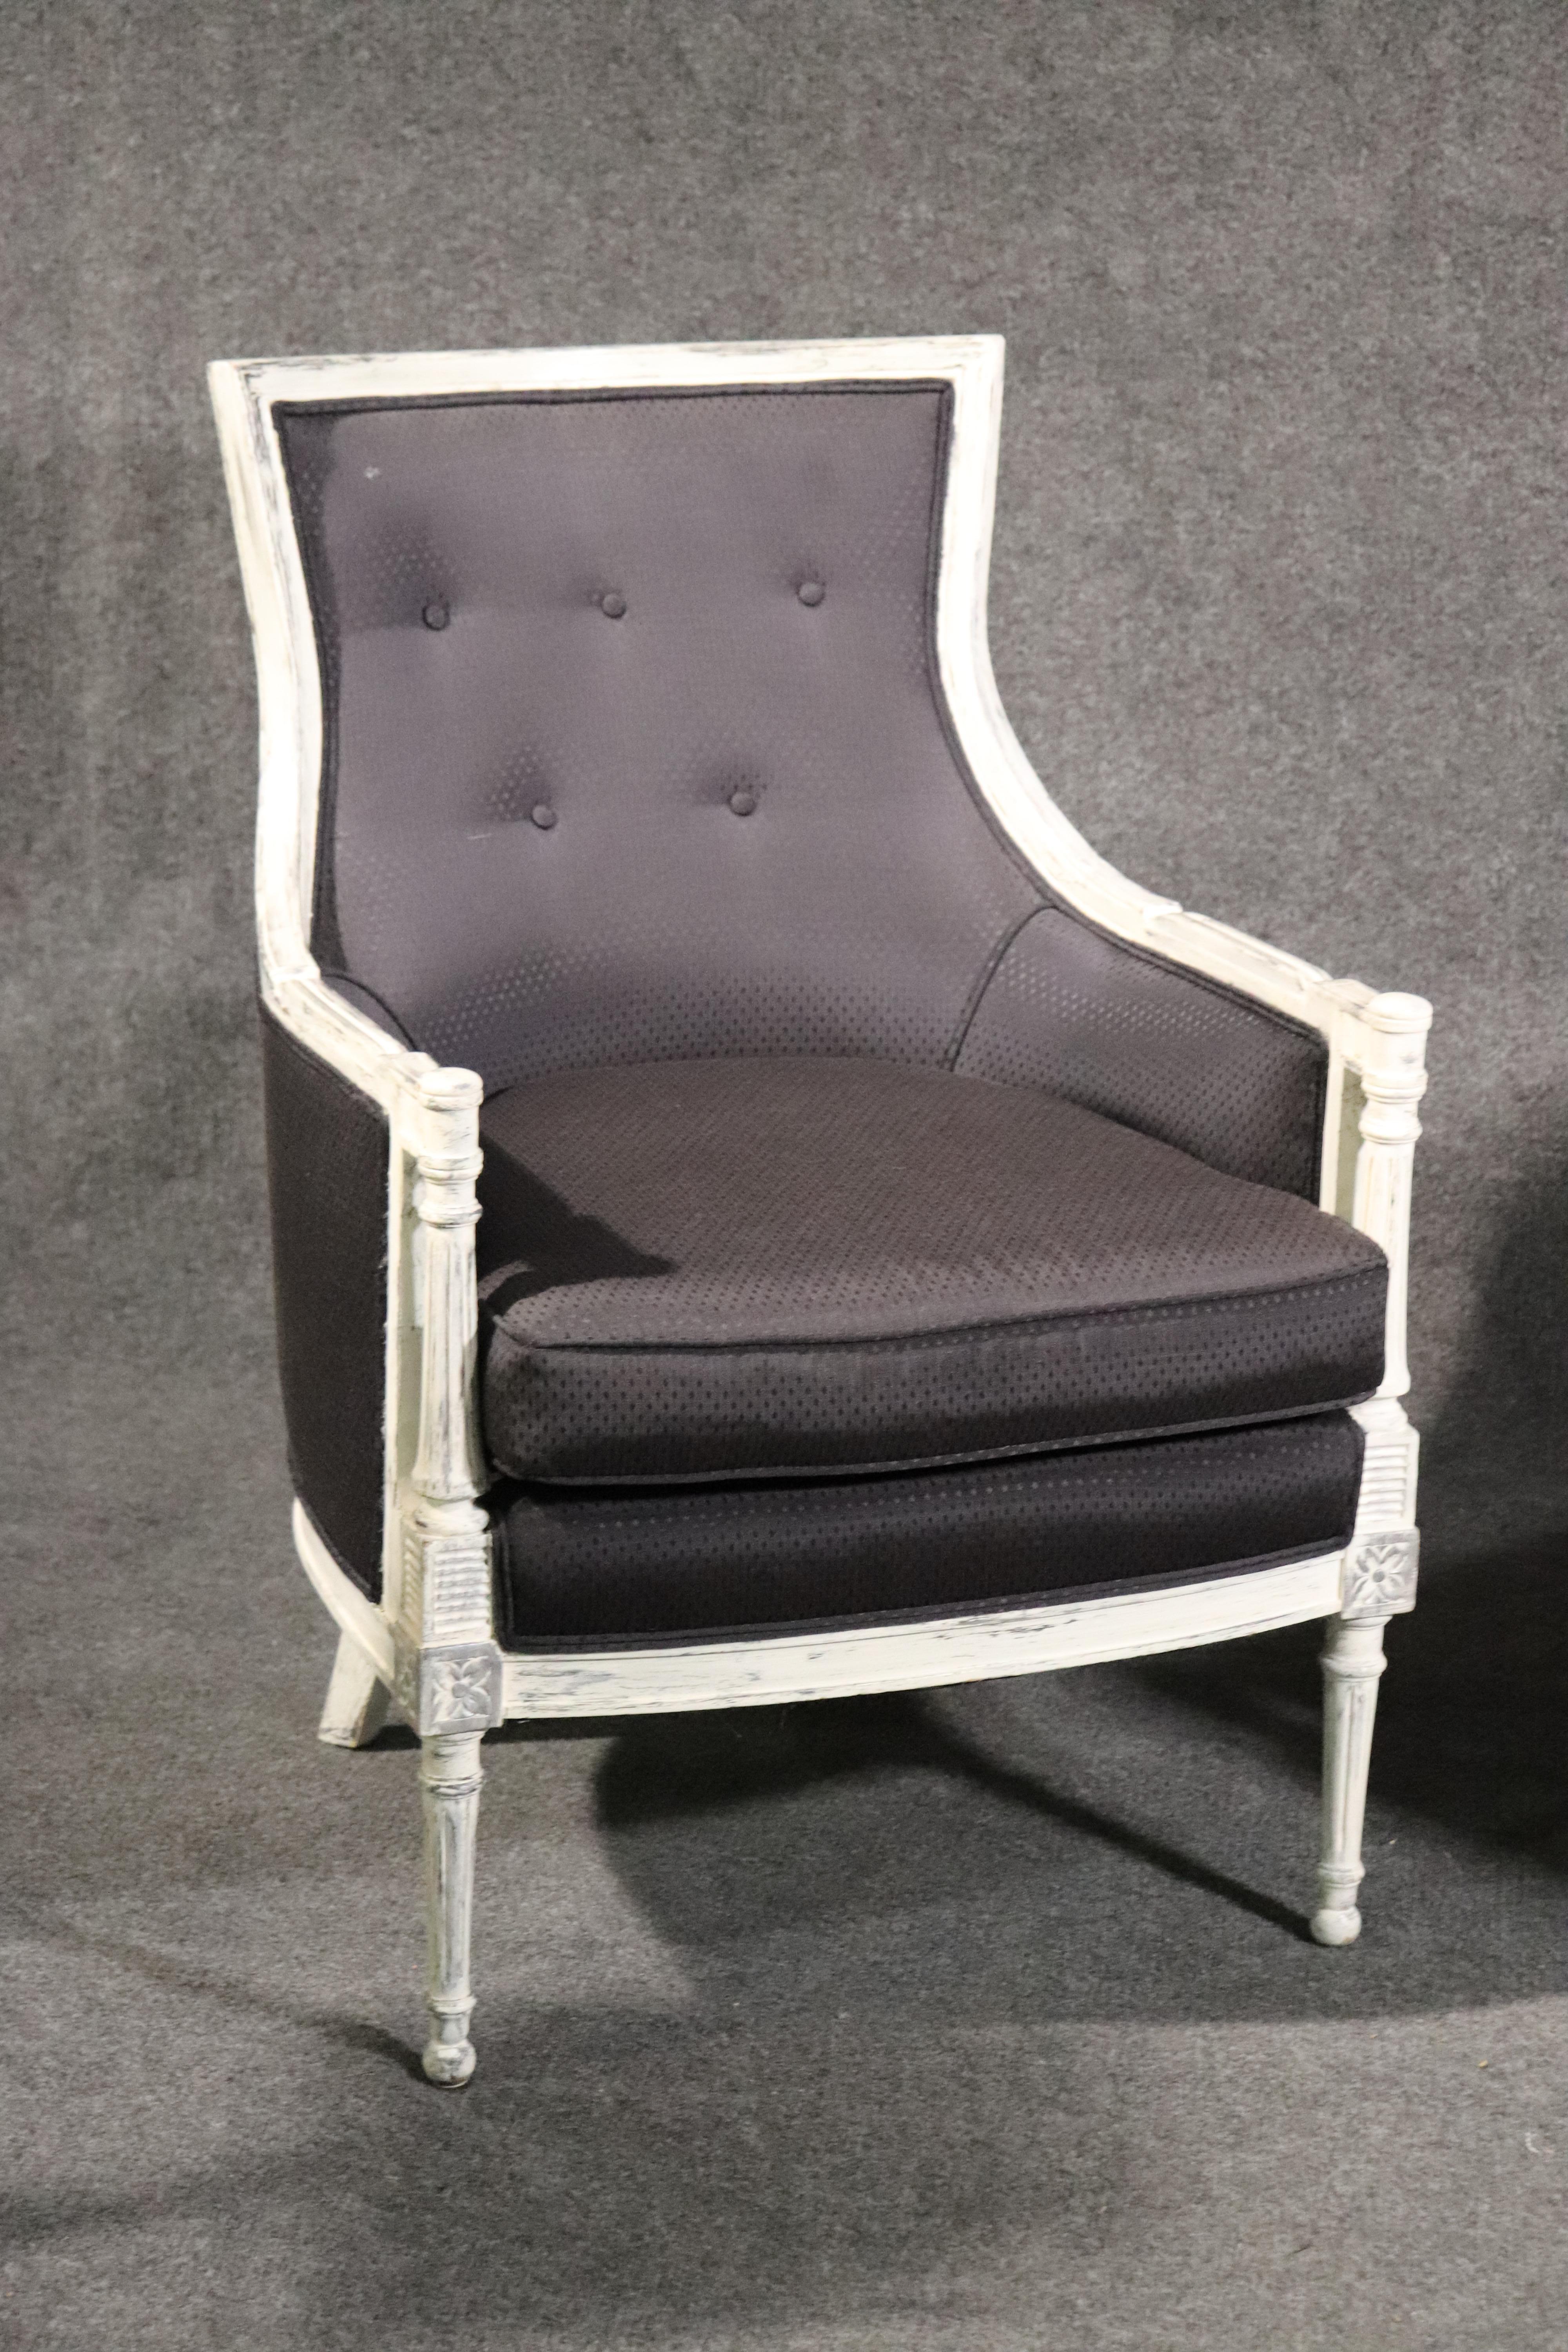 This is a fantastic pair of French style bergère chairs in good black upholstery and bright white distressed painted finish. The chairs are very comfortable and go with everything in your home. They date to the 1950s era and have been recently